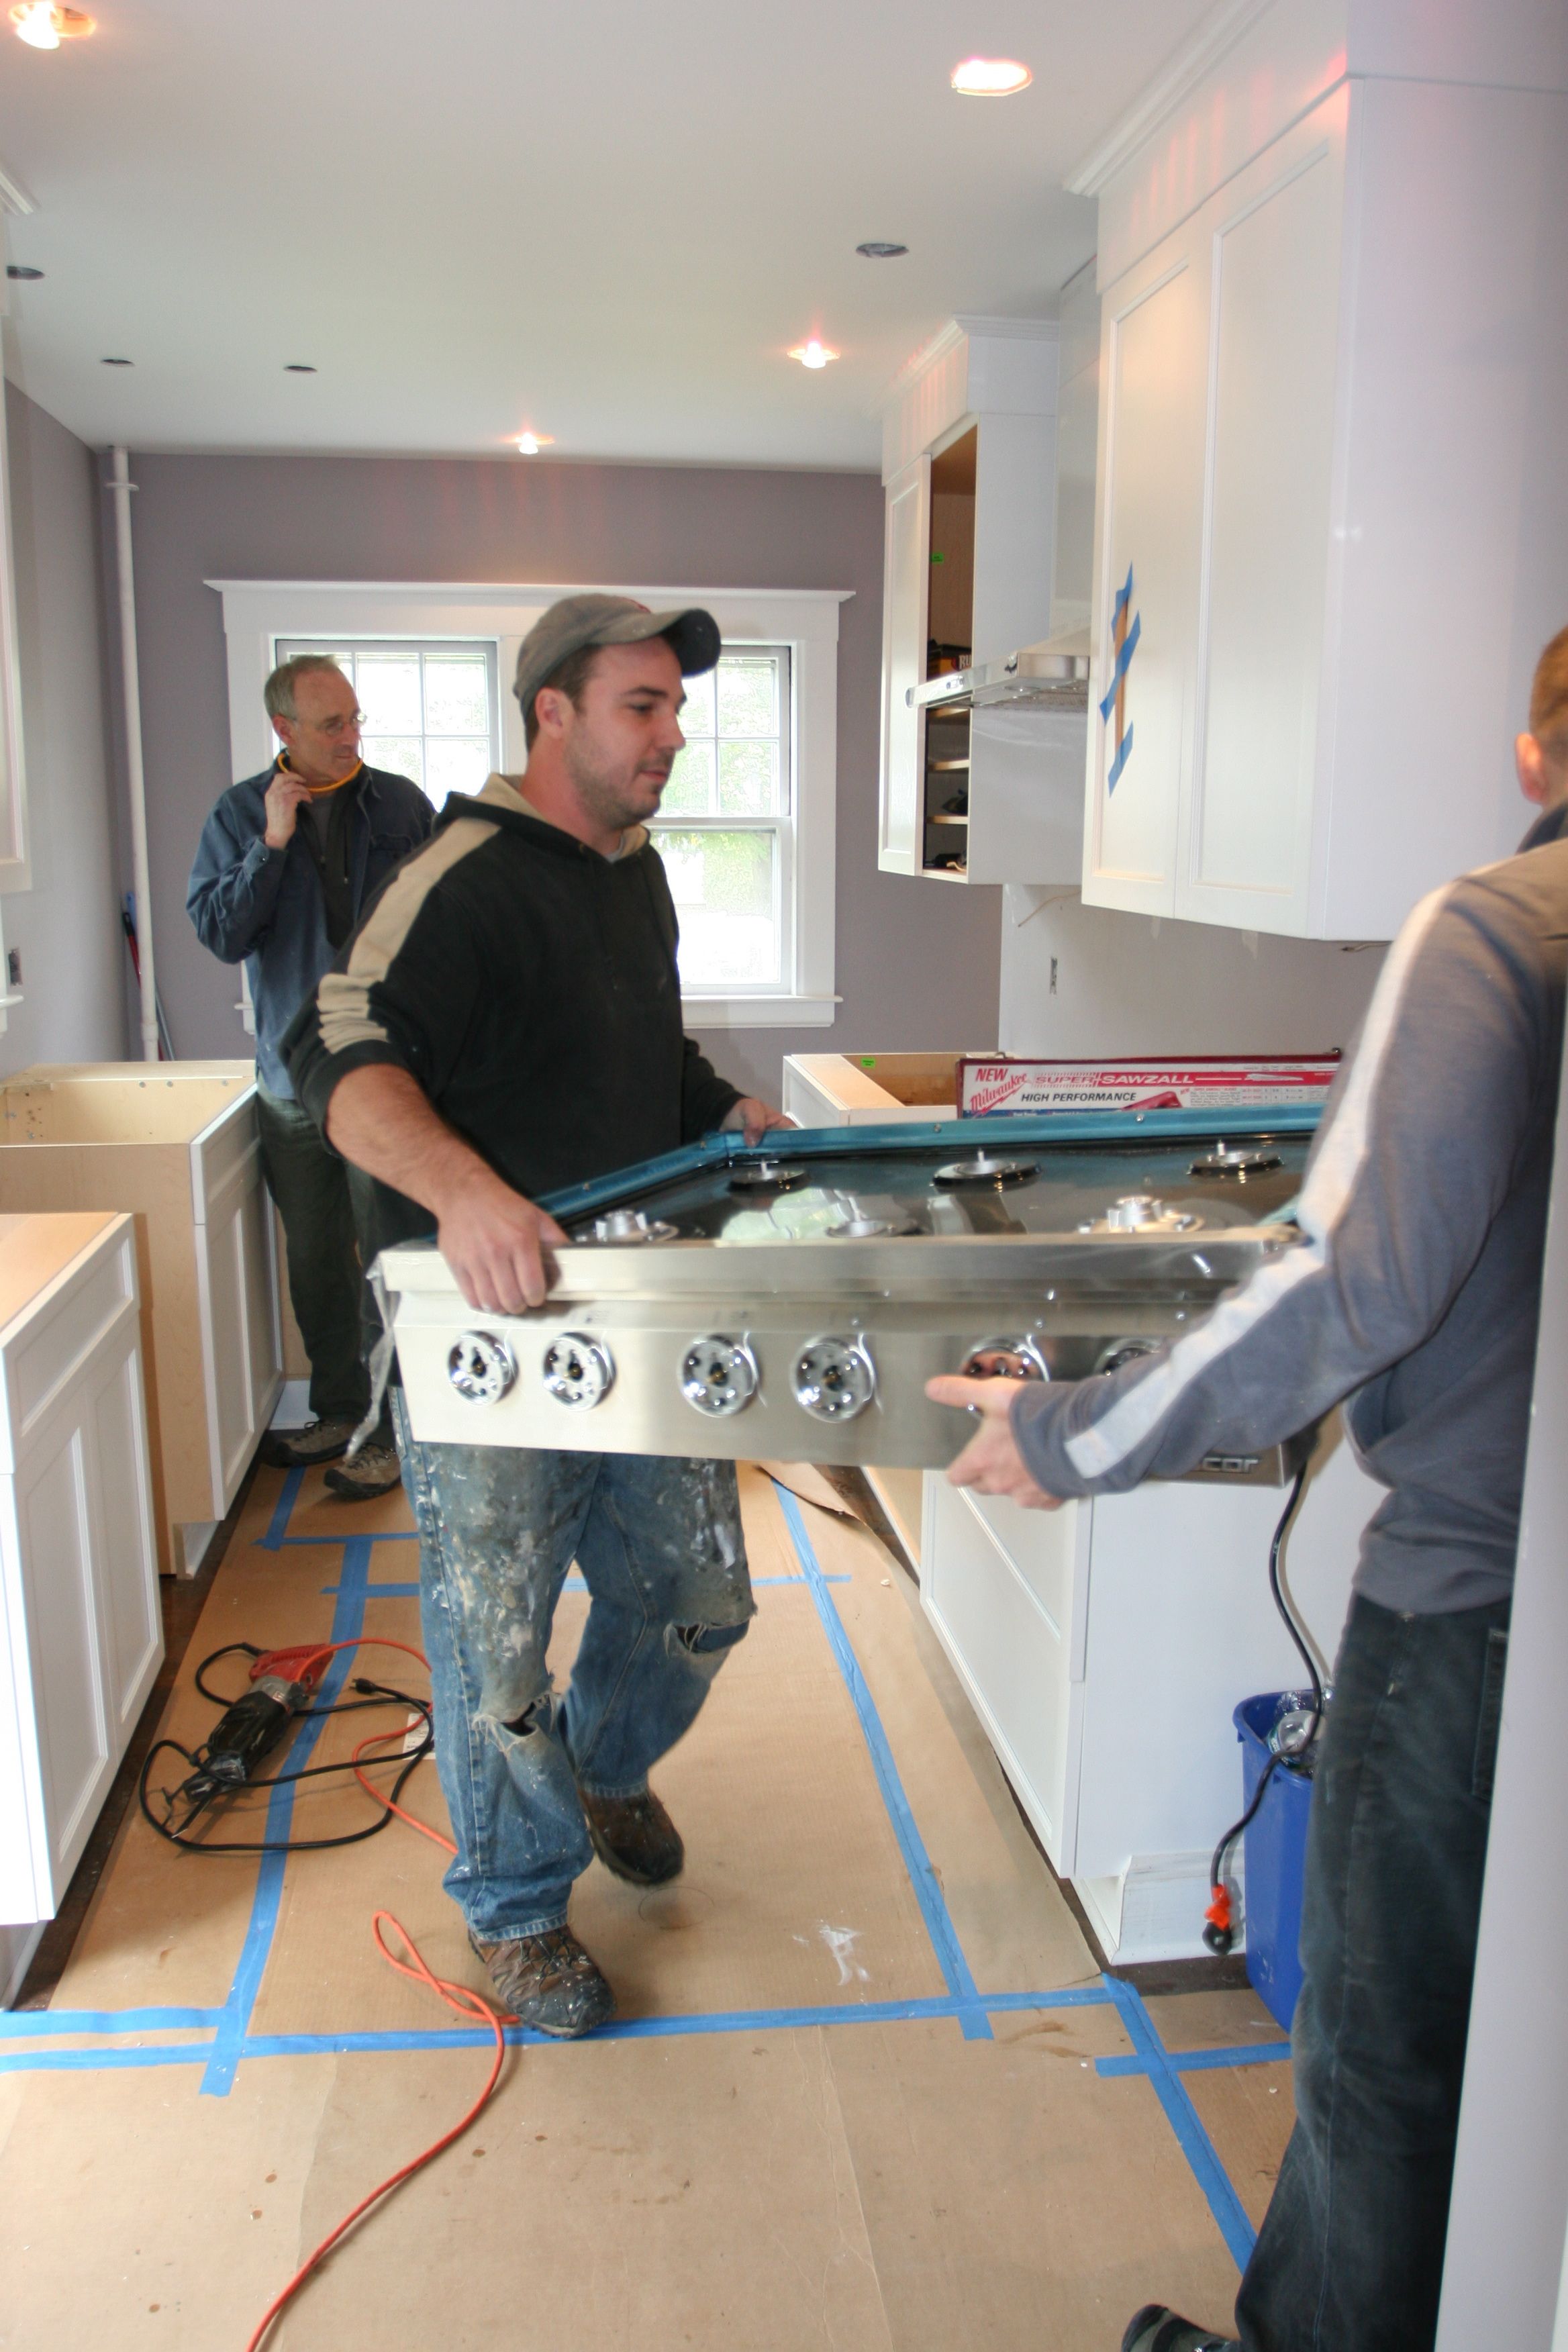 Jeff and Dave moving the appliances out of the way so they won't get damaged (or be in the way for the install).